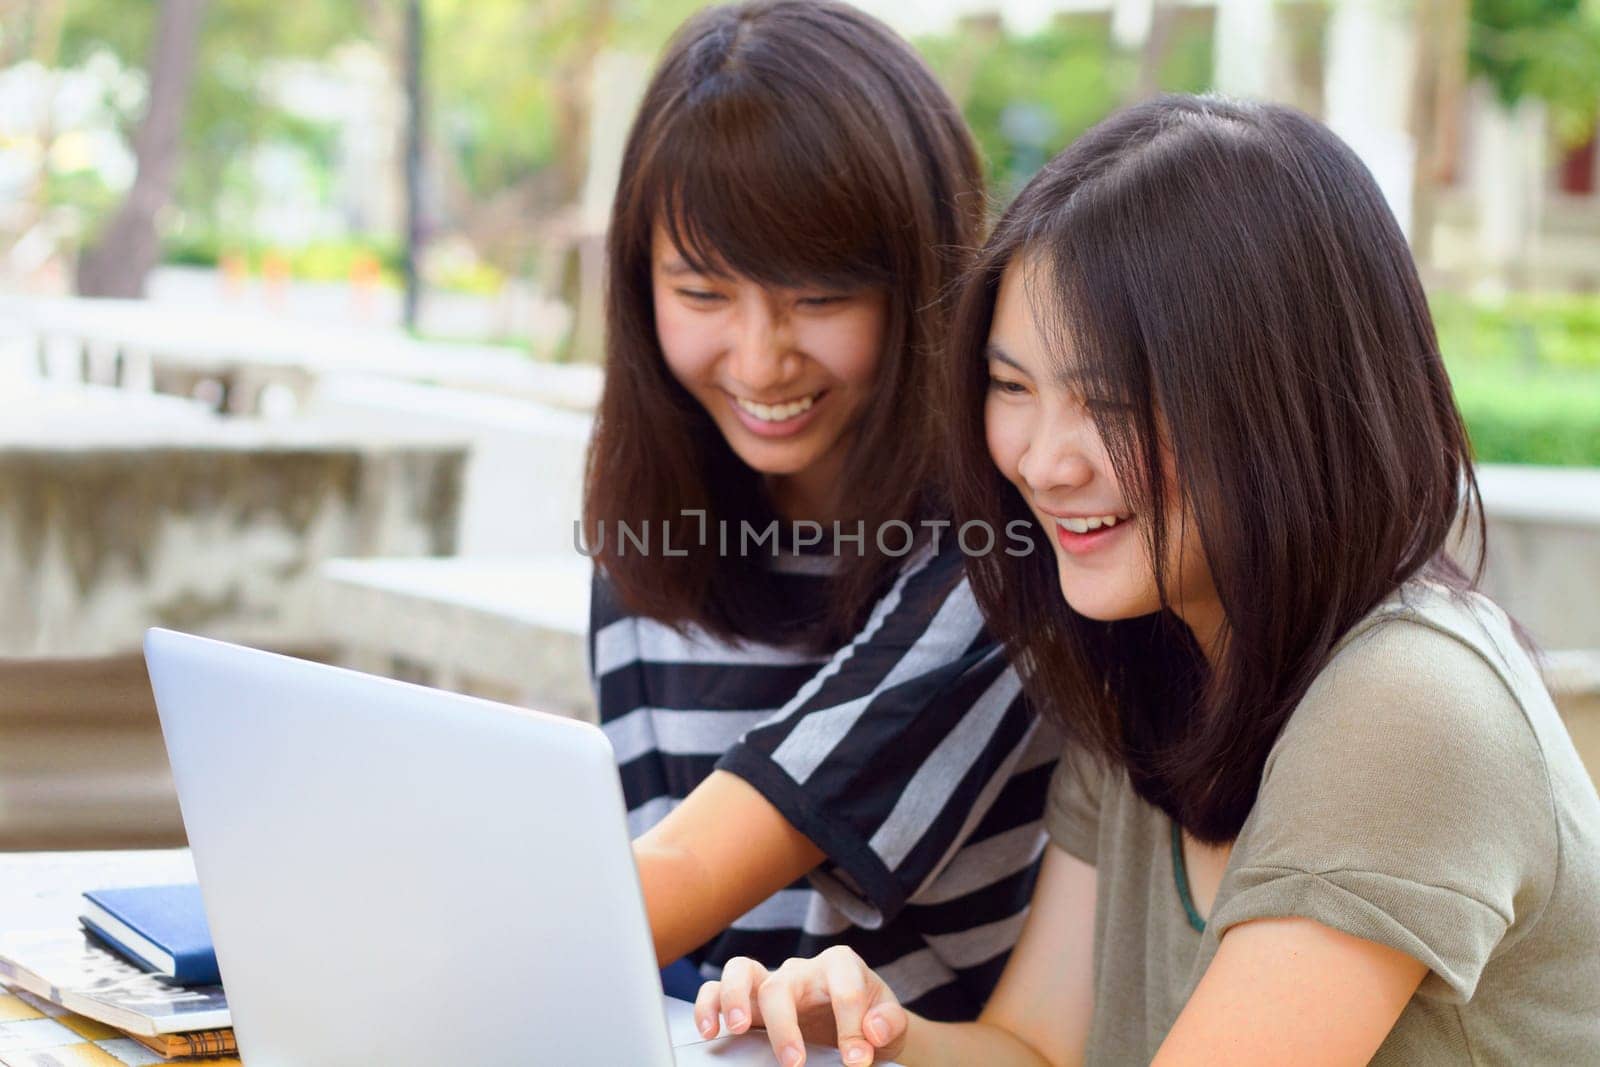 Laptop, university and female students studying outdoor on campus for a test, exam or assignment. Happy, smile and women doing research or browsing for education information on a computer at college